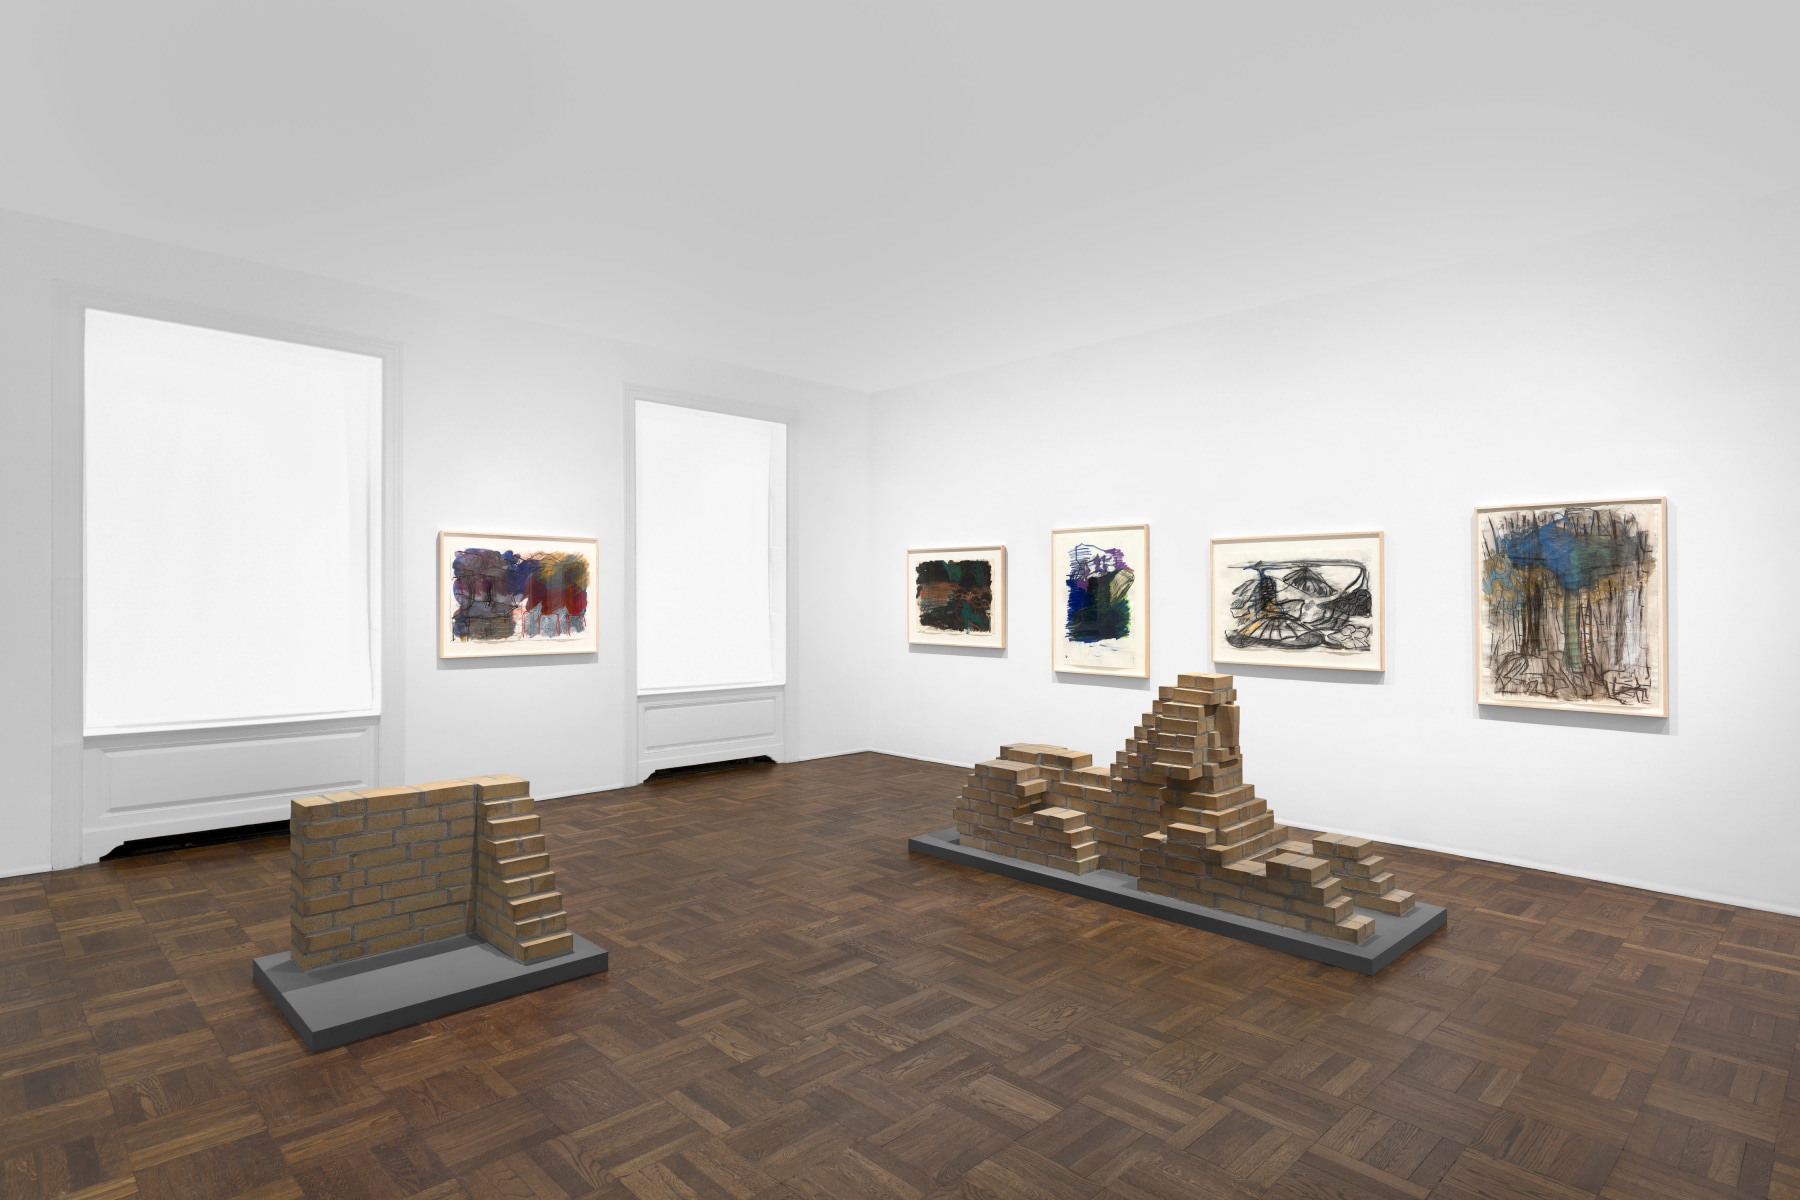 PER KIRKEBY Works on Paper, Works in Brick 20 November 2019 through 25 January 2020 UPPER EAST SIDE, NEW YORK, Installation View 3